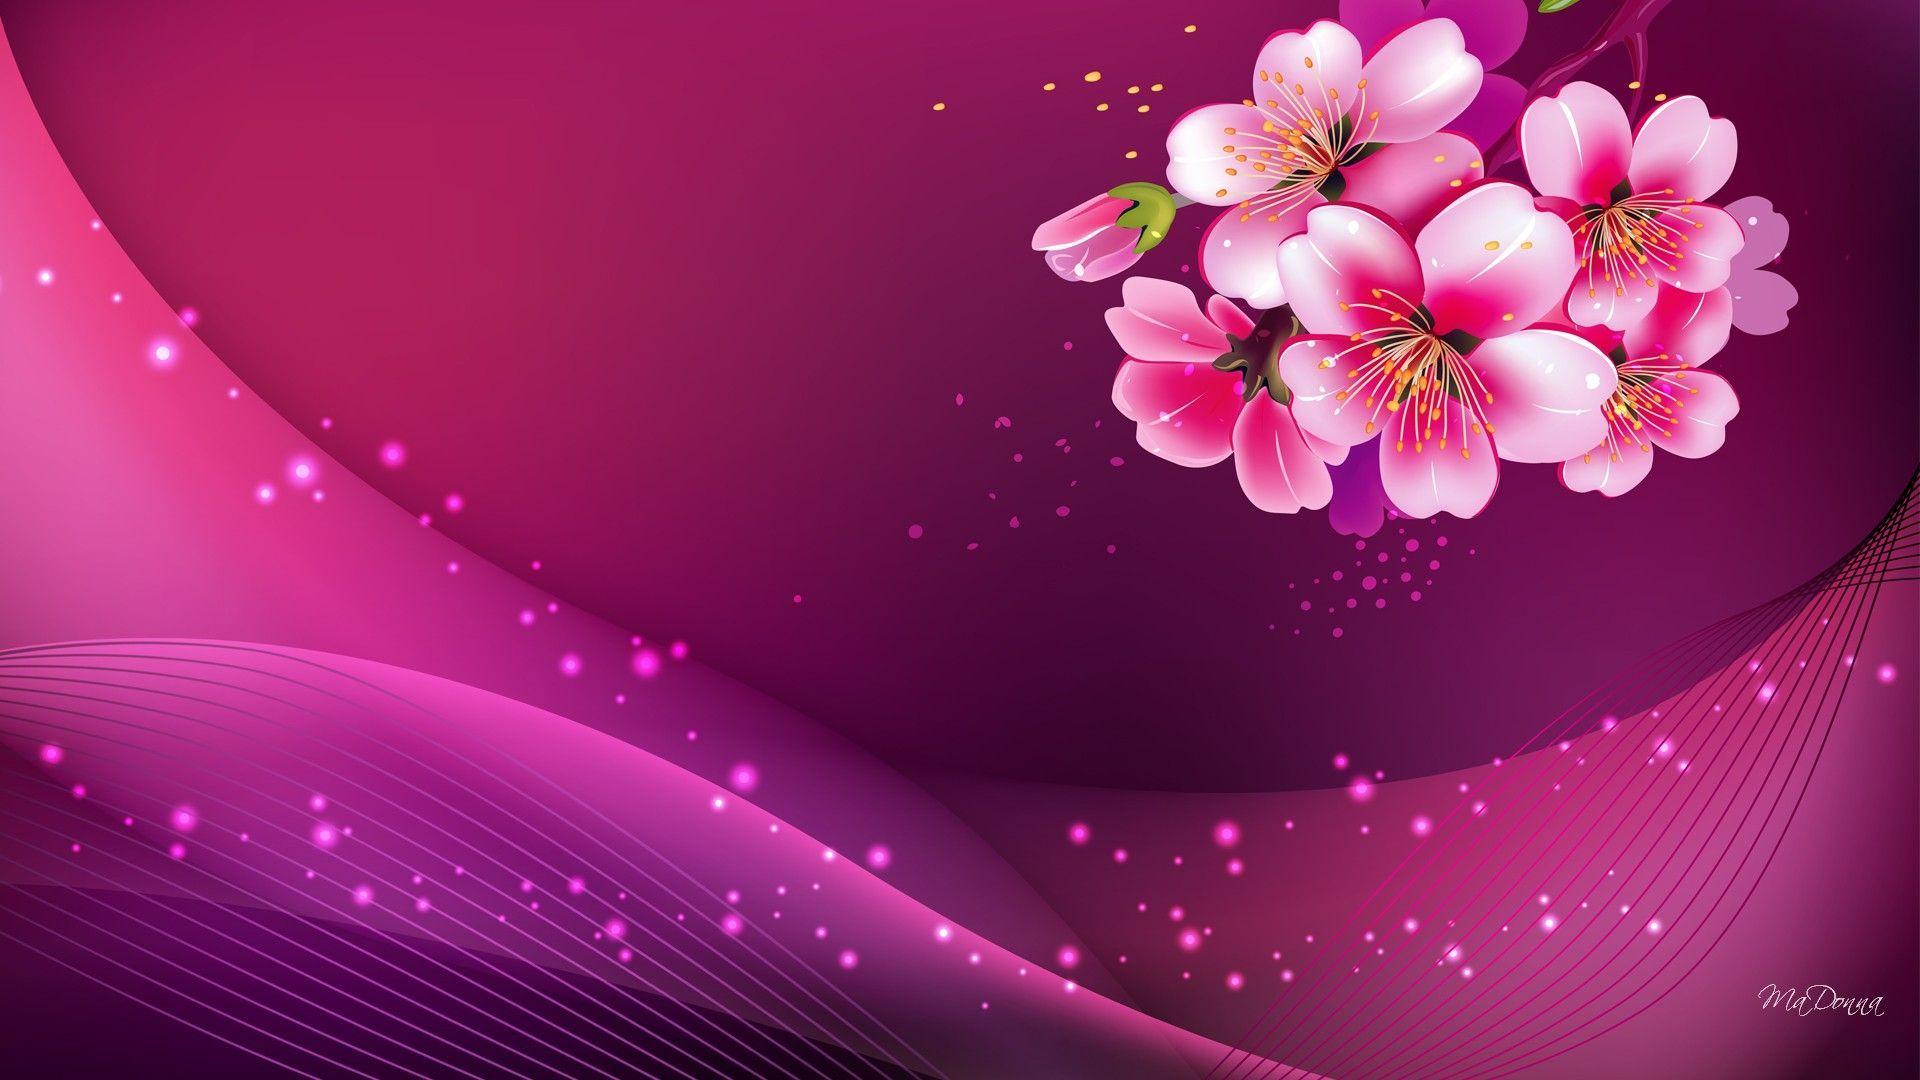 widescreen pink background HD image pc. COLOURS. HD